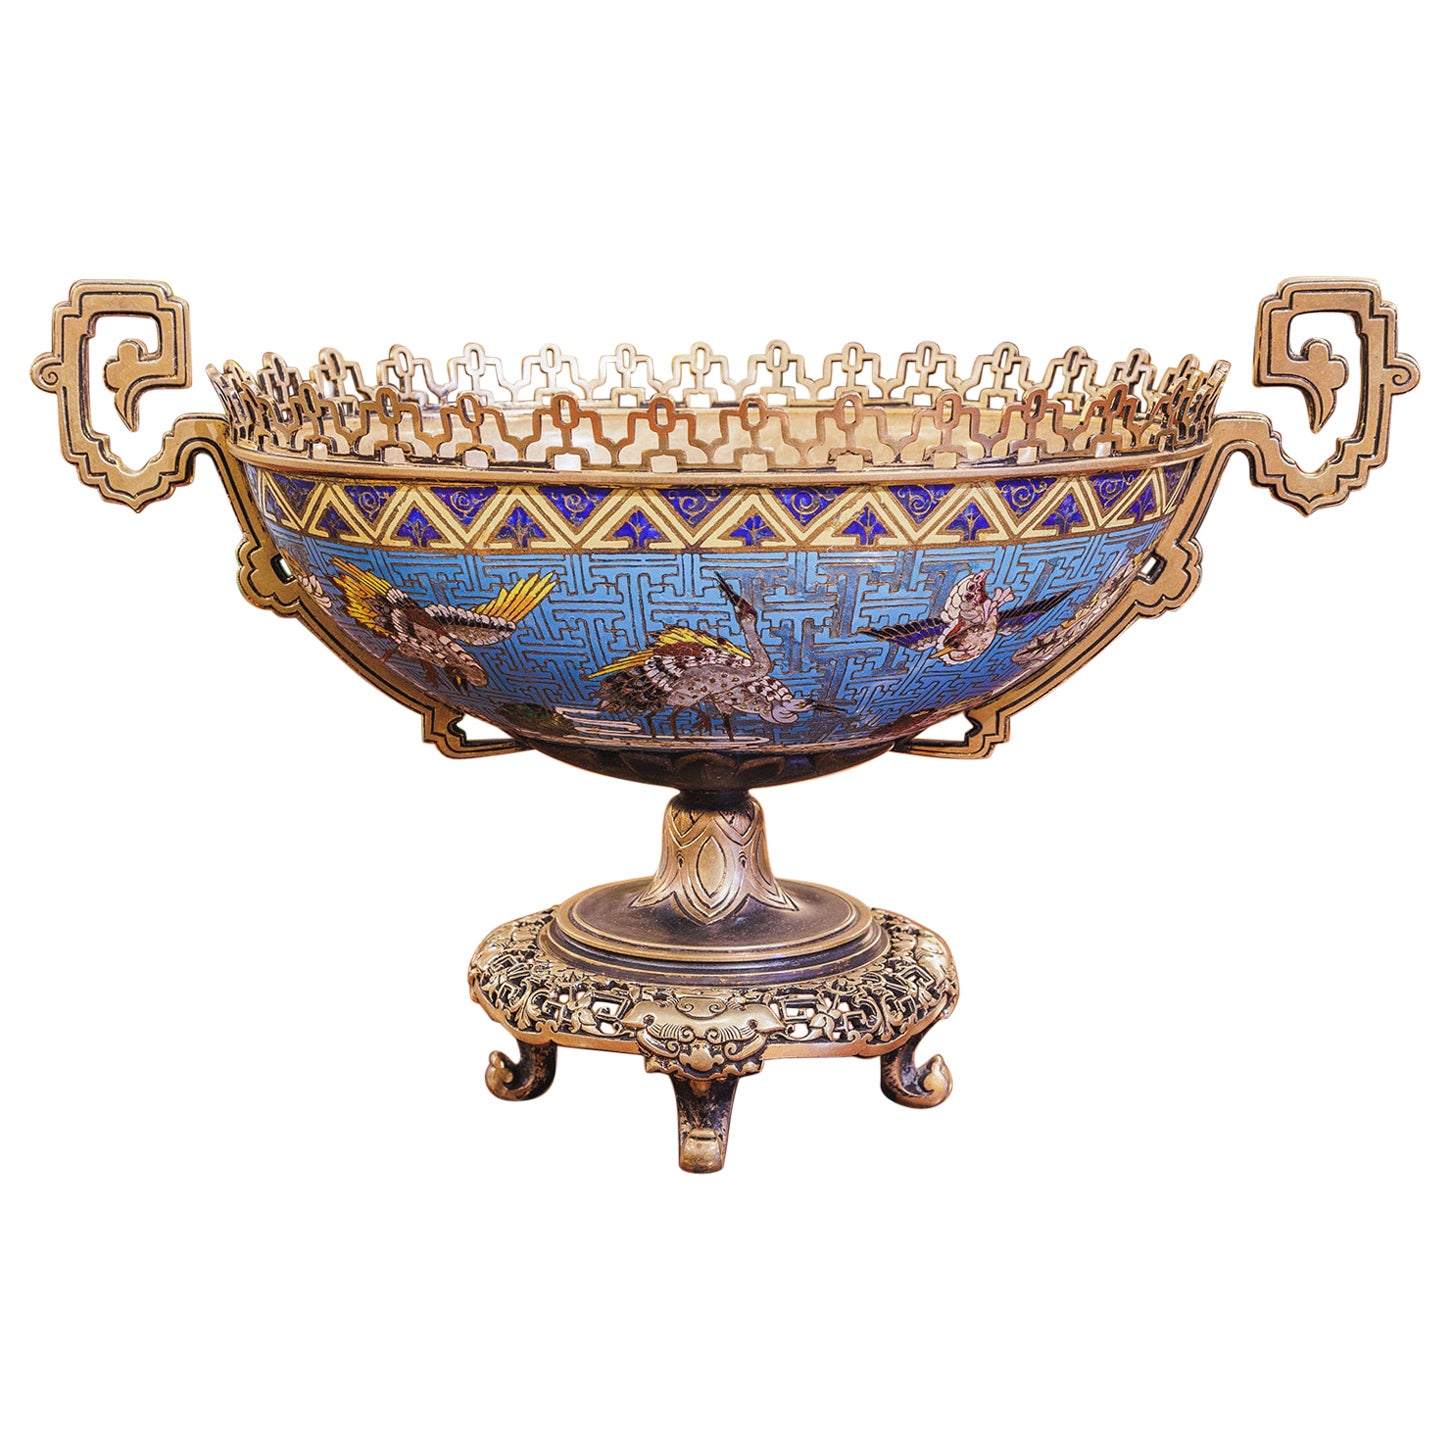 A very fine 19th century French Cloissone 11and gilt bronze centerpiece For Sale